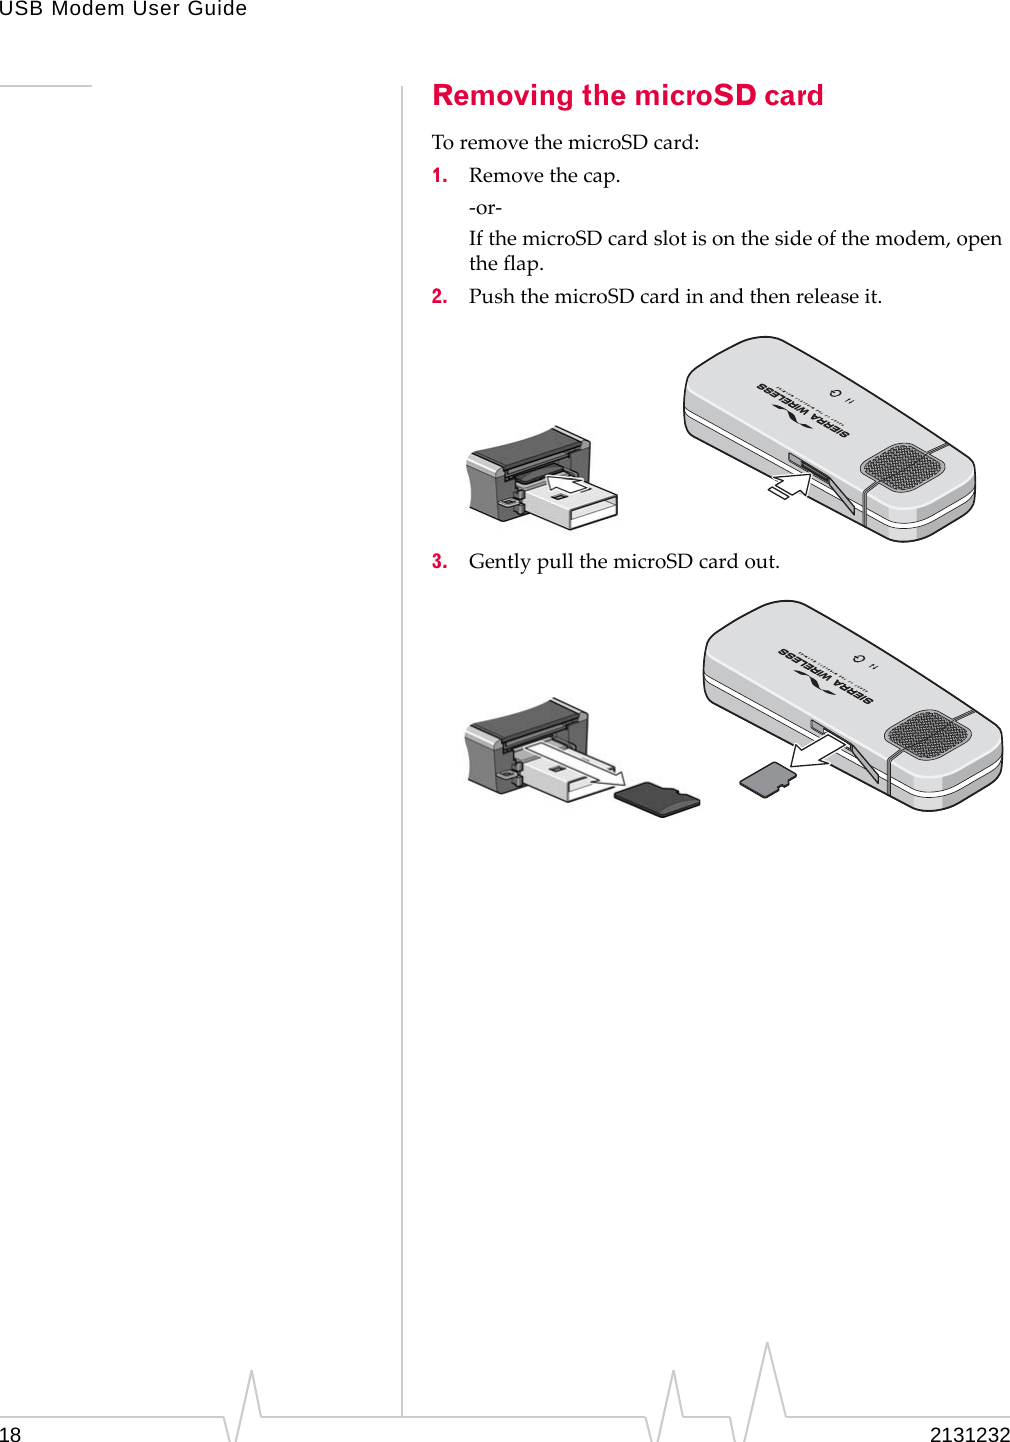 USB Modem User Guide18 2131232Removing the microSD cardToremovethemicroSDcard:1. Removethecap.‐or‐IfthemicroSDcardslotisonthesideofthemodem,opentheflap.2. PushthemicroSDcardinandthenreleaseit.3. GentlypullthemicroSDcardout.®®